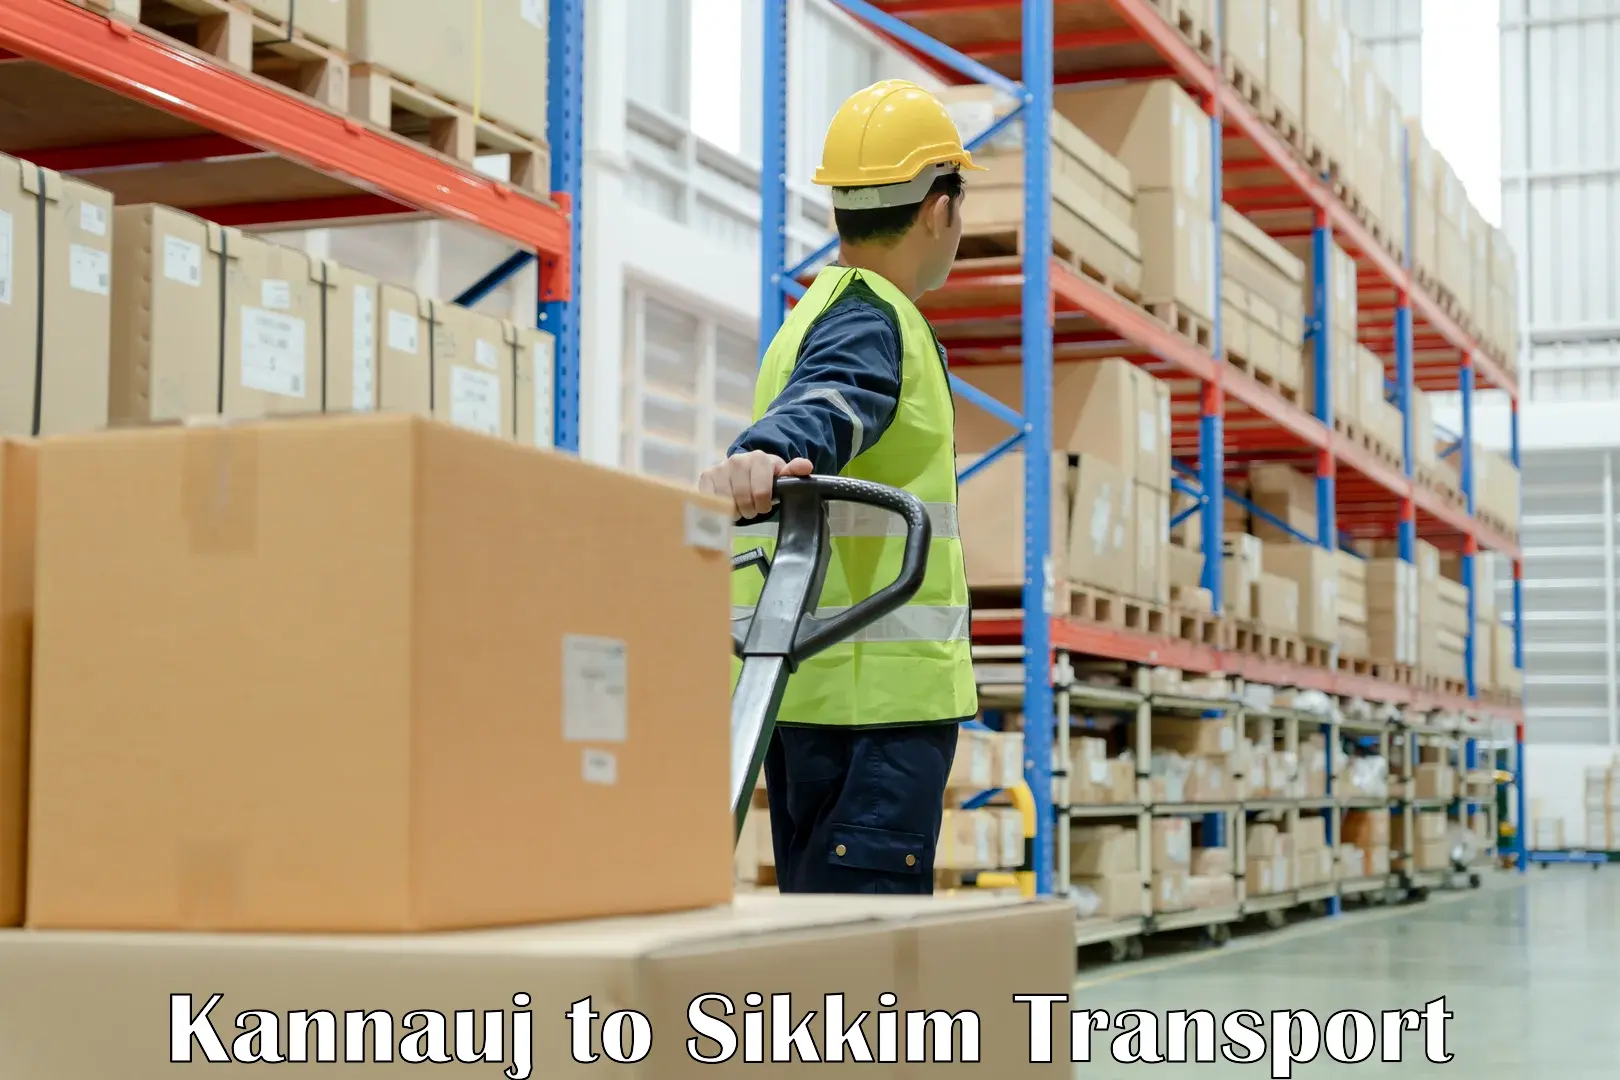 Truck transport companies in India Kannauj to South Sikkim